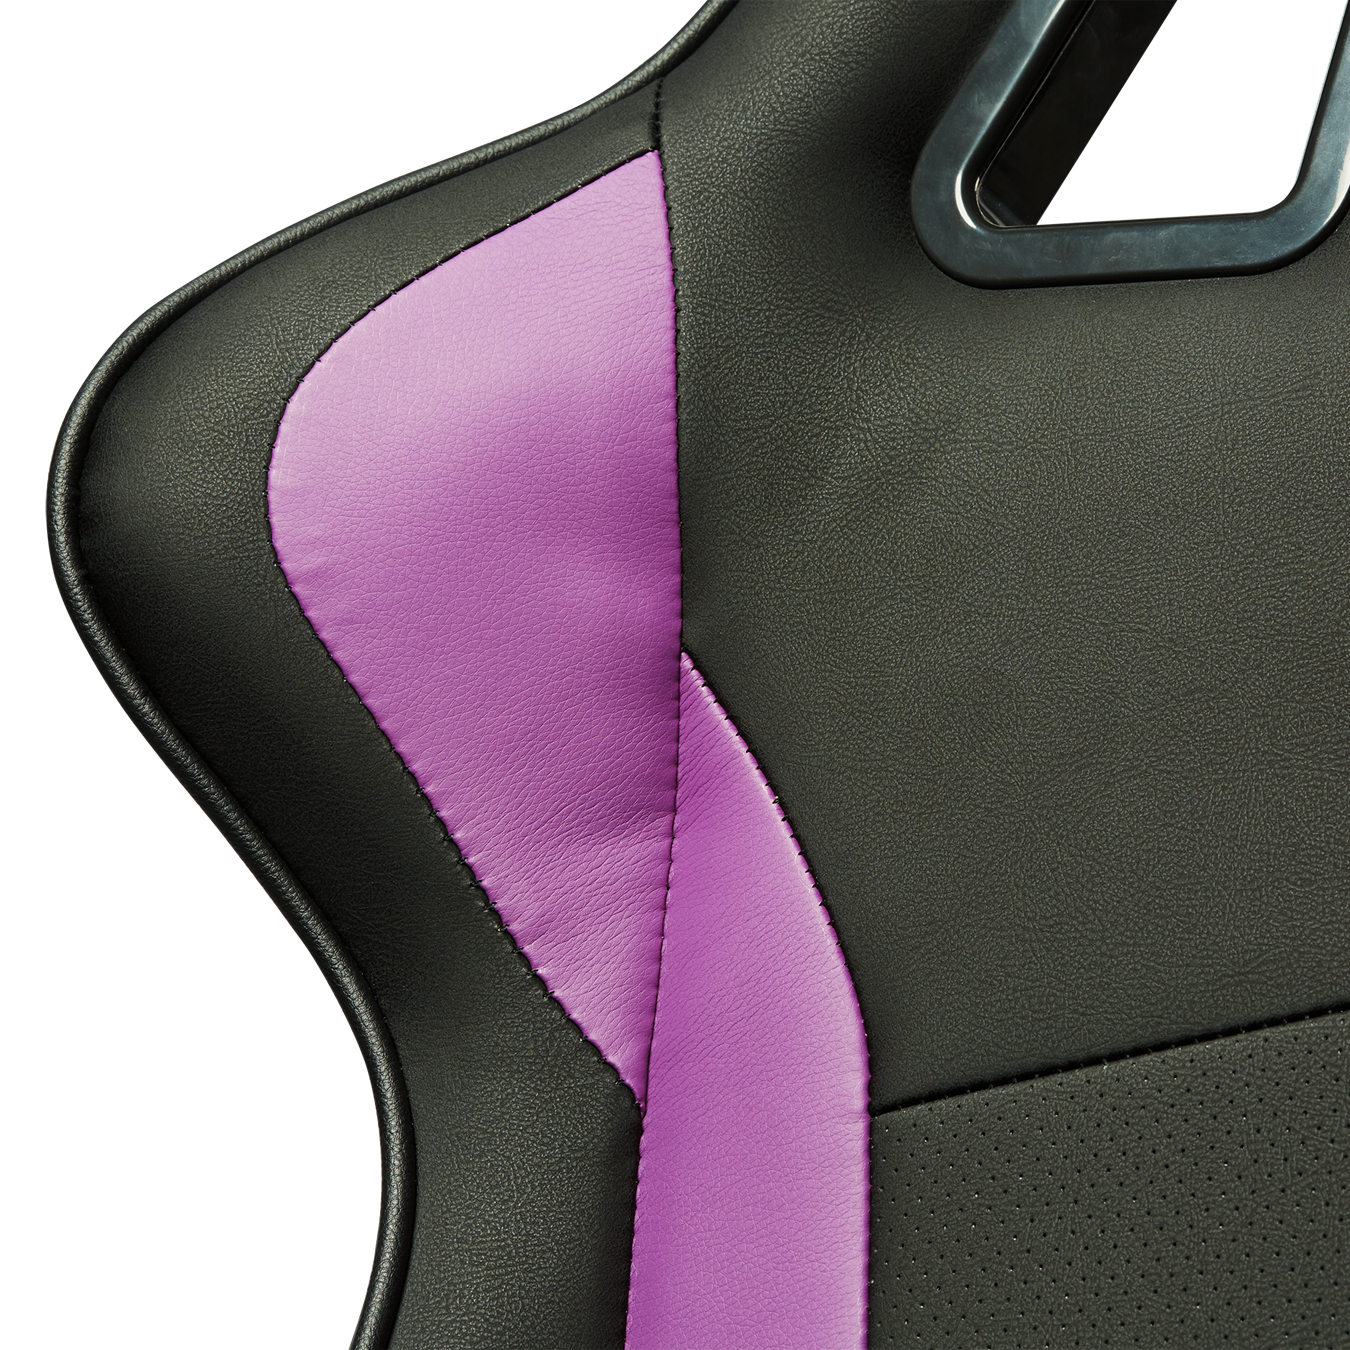 Caliber R1 Purple -  The breathable PU provides maximum comfort for all body types and keeps you feeling cool and energized at all times.